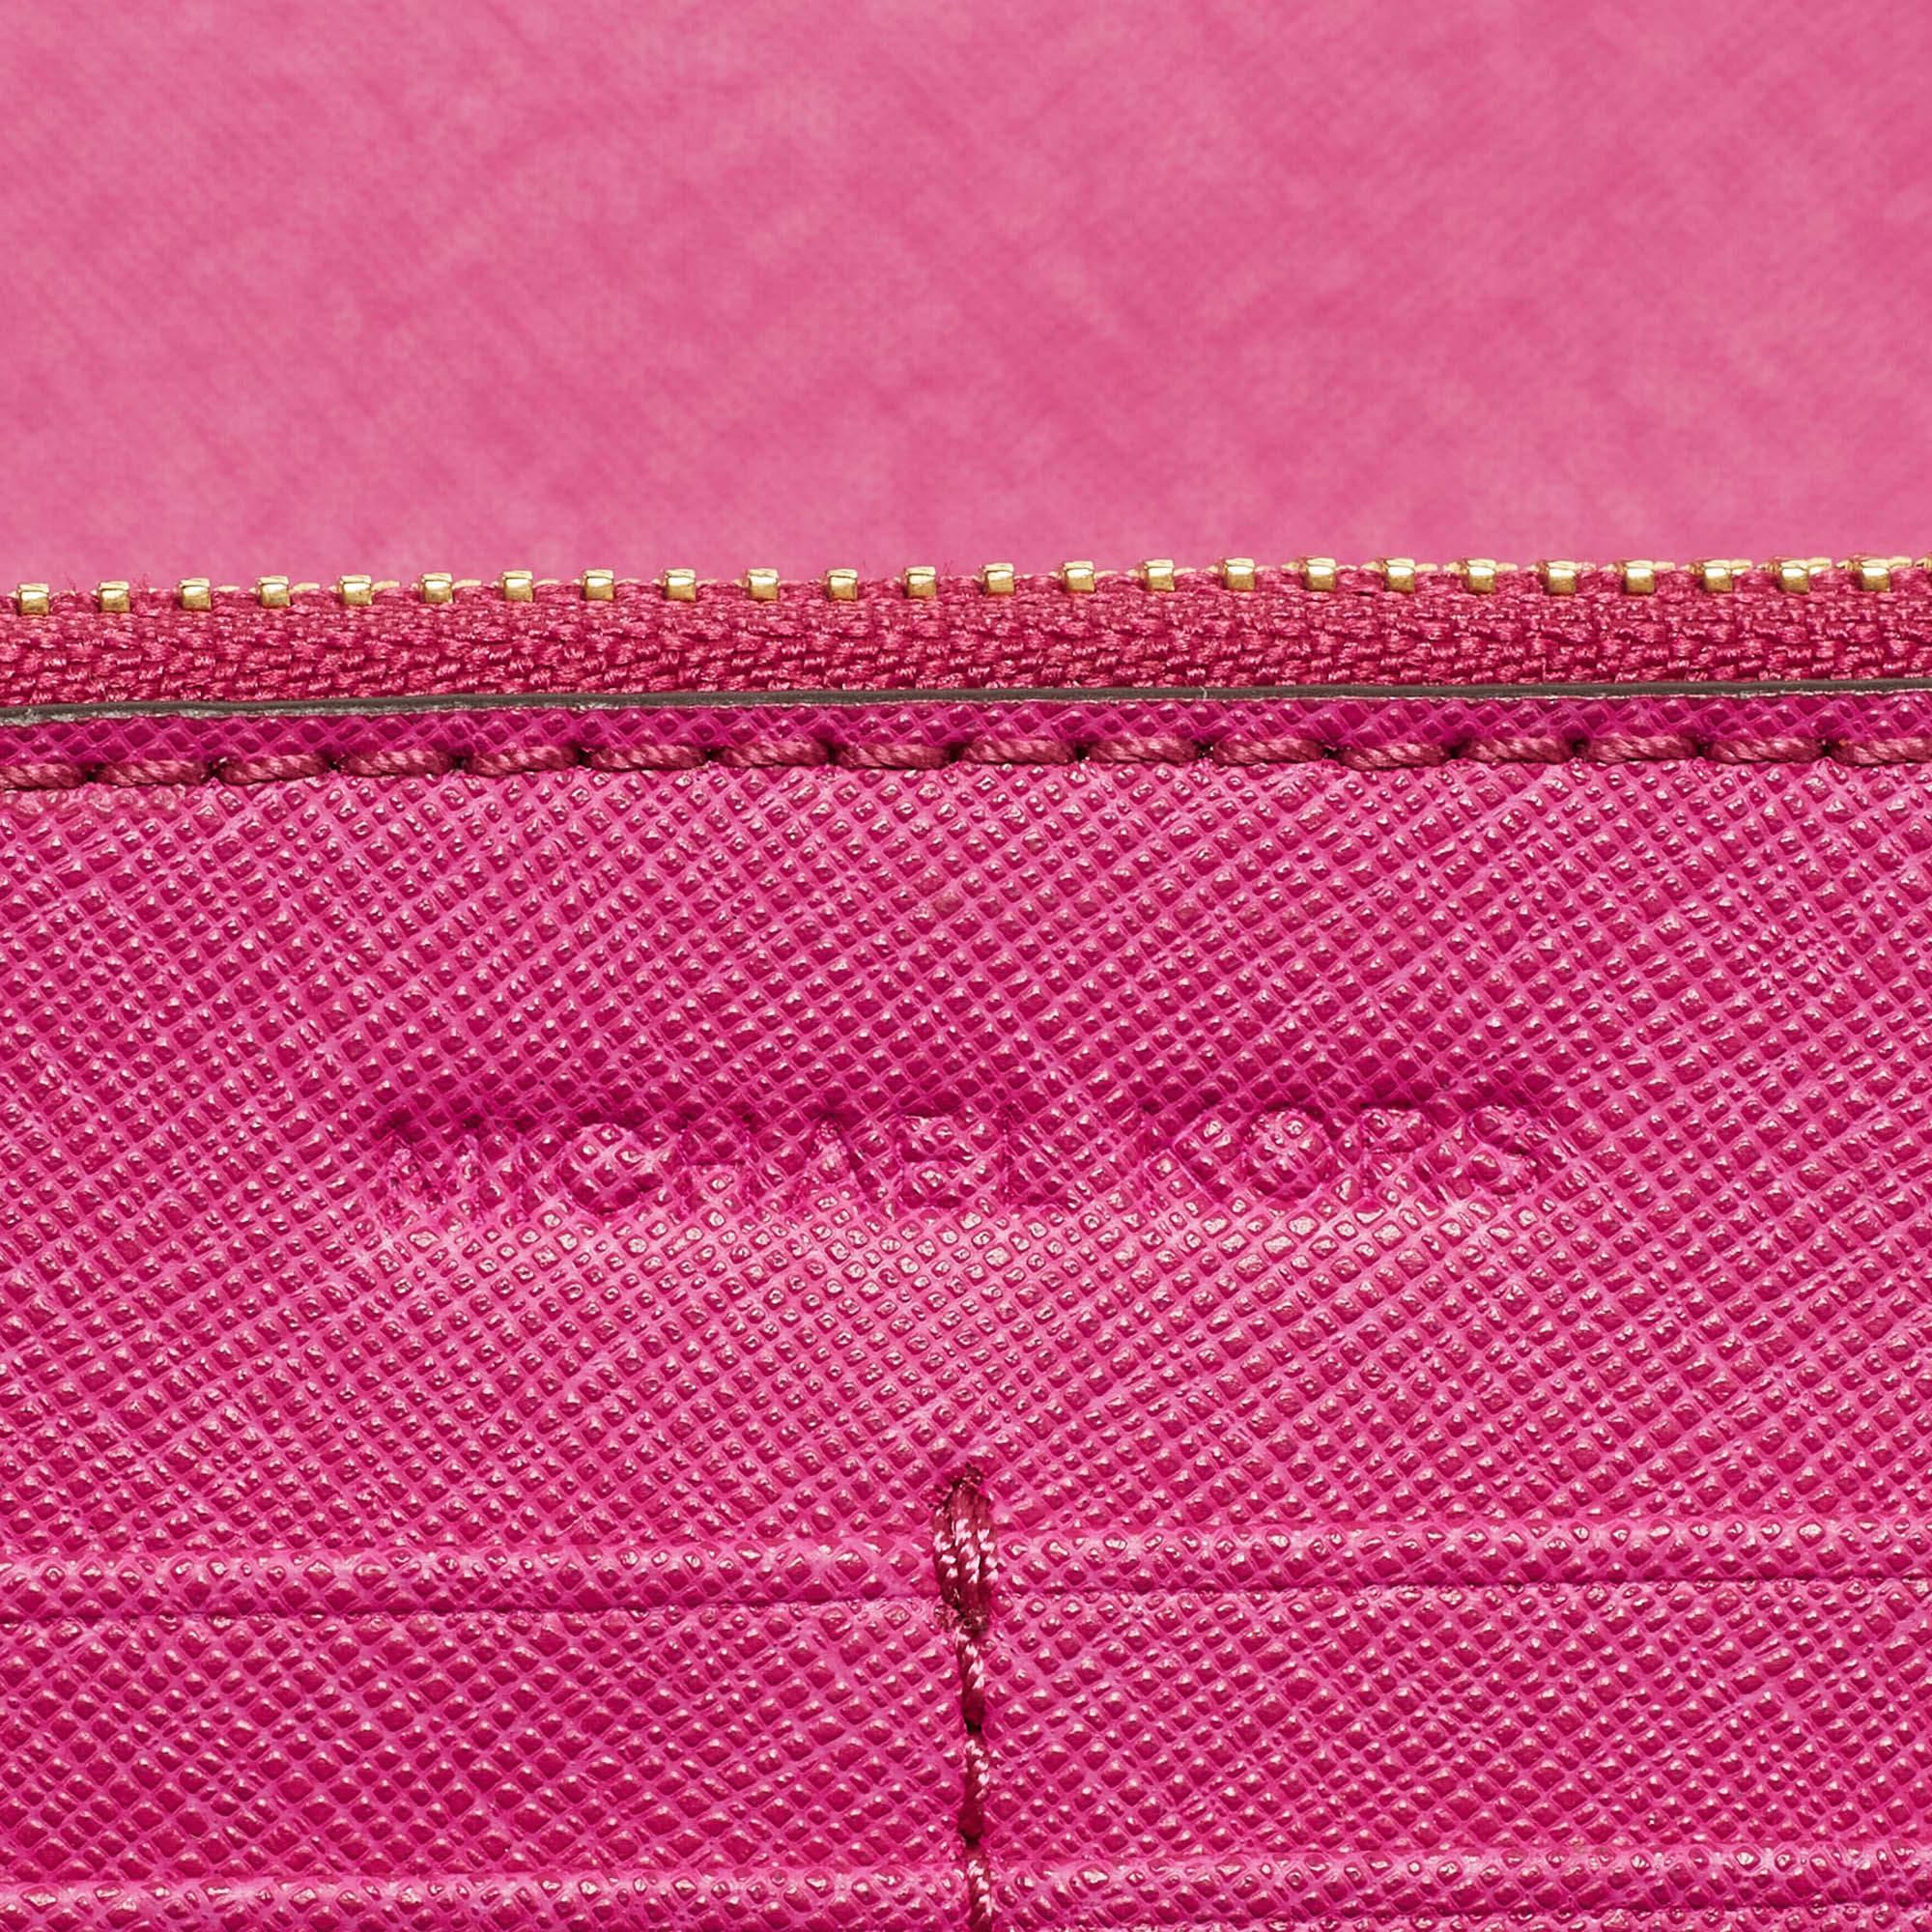 Michael Kors Pink Saffiano Leather Flap 3in1 Crossbody Bag 5